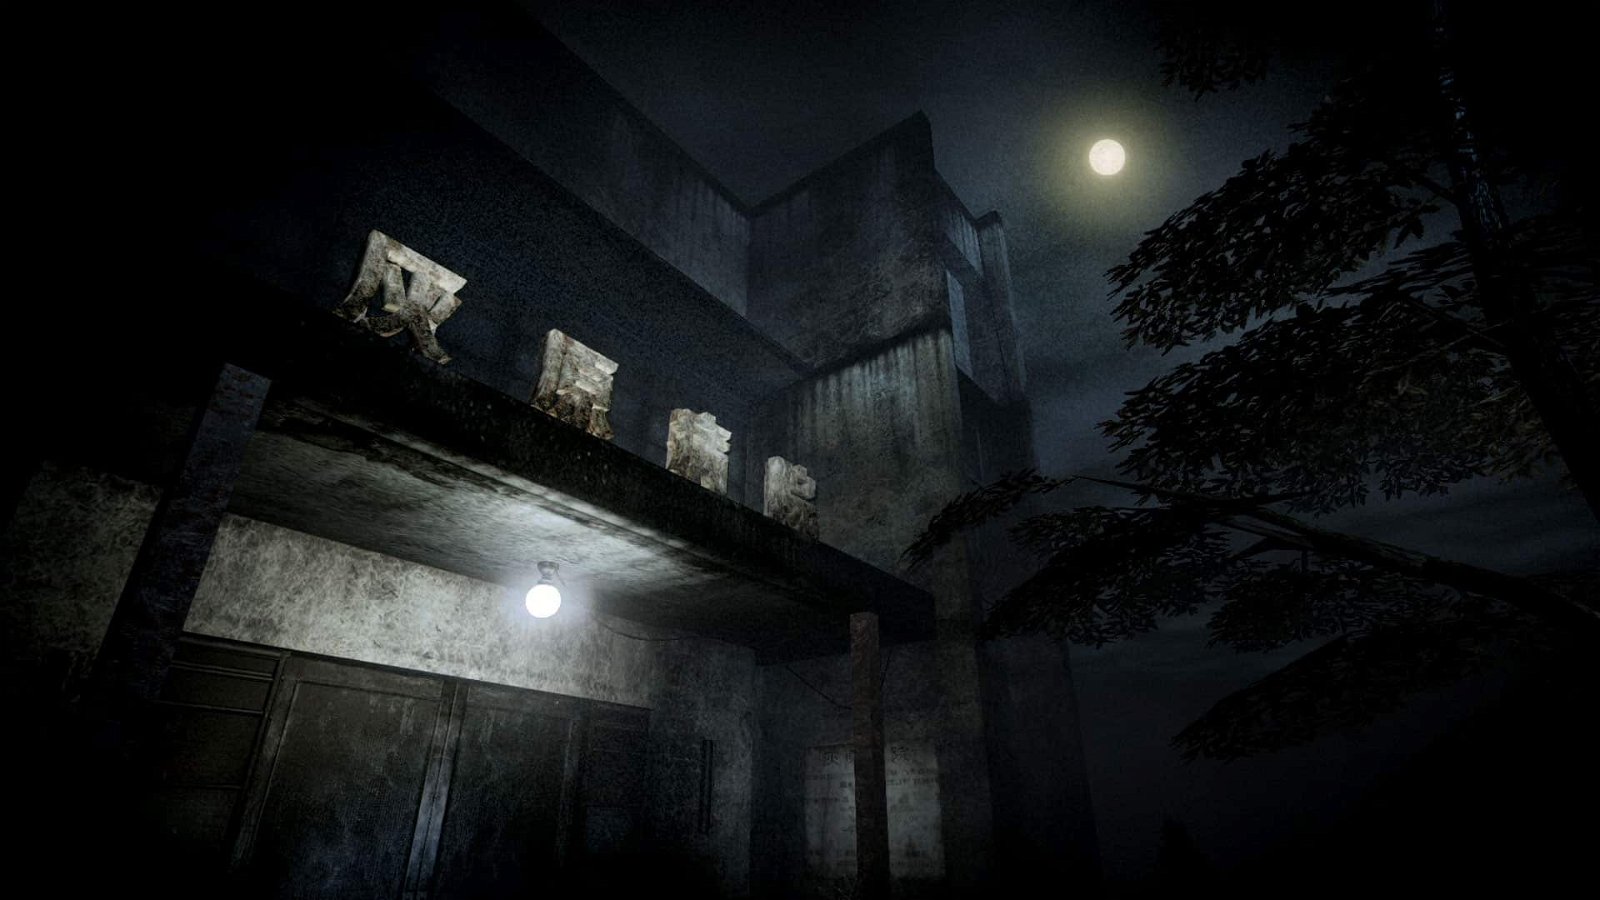 Fatal Frame: Mask of the Lunar Eclipse, Fatal Frame, Fatal Frame - Mask of the Lunar Eclipse, Switch, Nintendo Switch, Nintendo, release date, trailer, screenshots, pre-order now, Japan, game overview, Asia, US, North America, Europe, PS4, PlayStation 4, Fatal Frame: Mask of the Lunar Eclipse remaster, update, producer messages, stages revealed